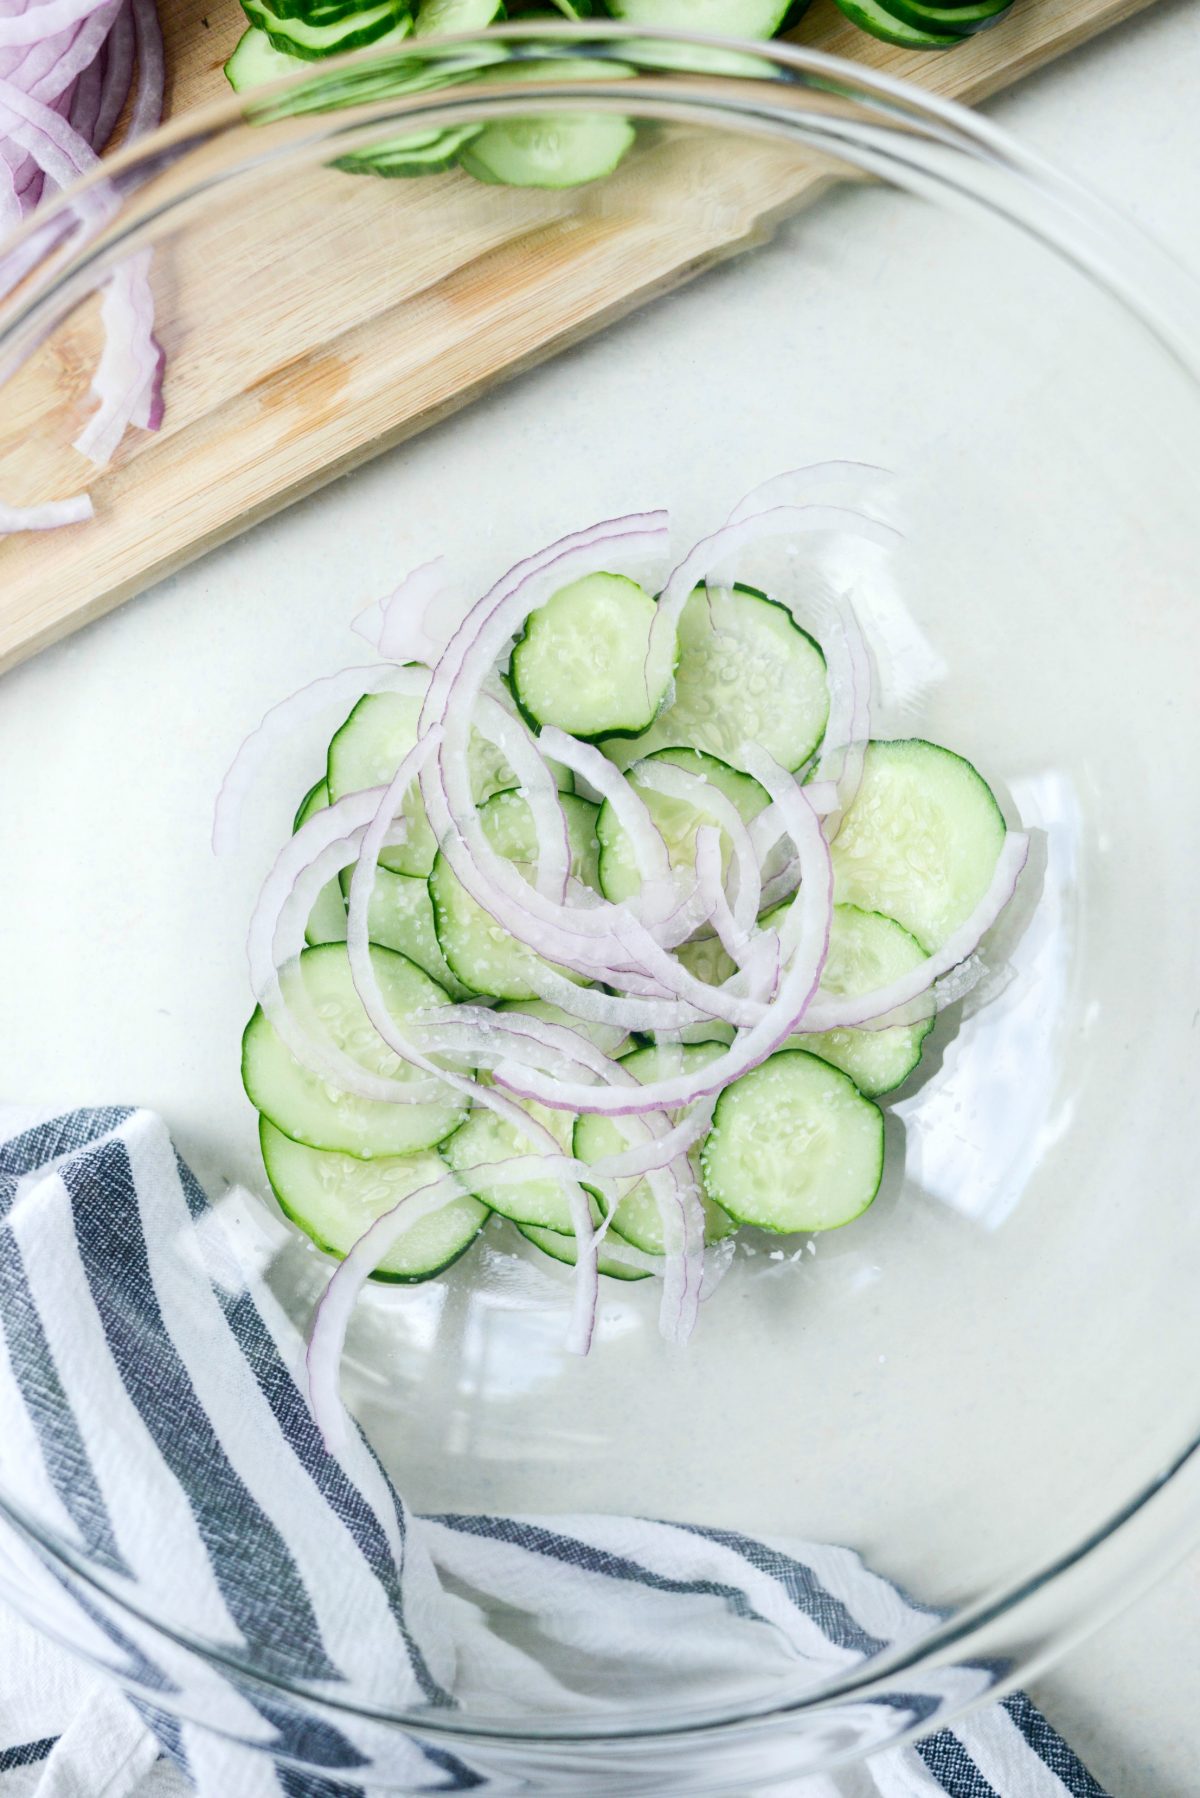 salt layers of cucumber and onion